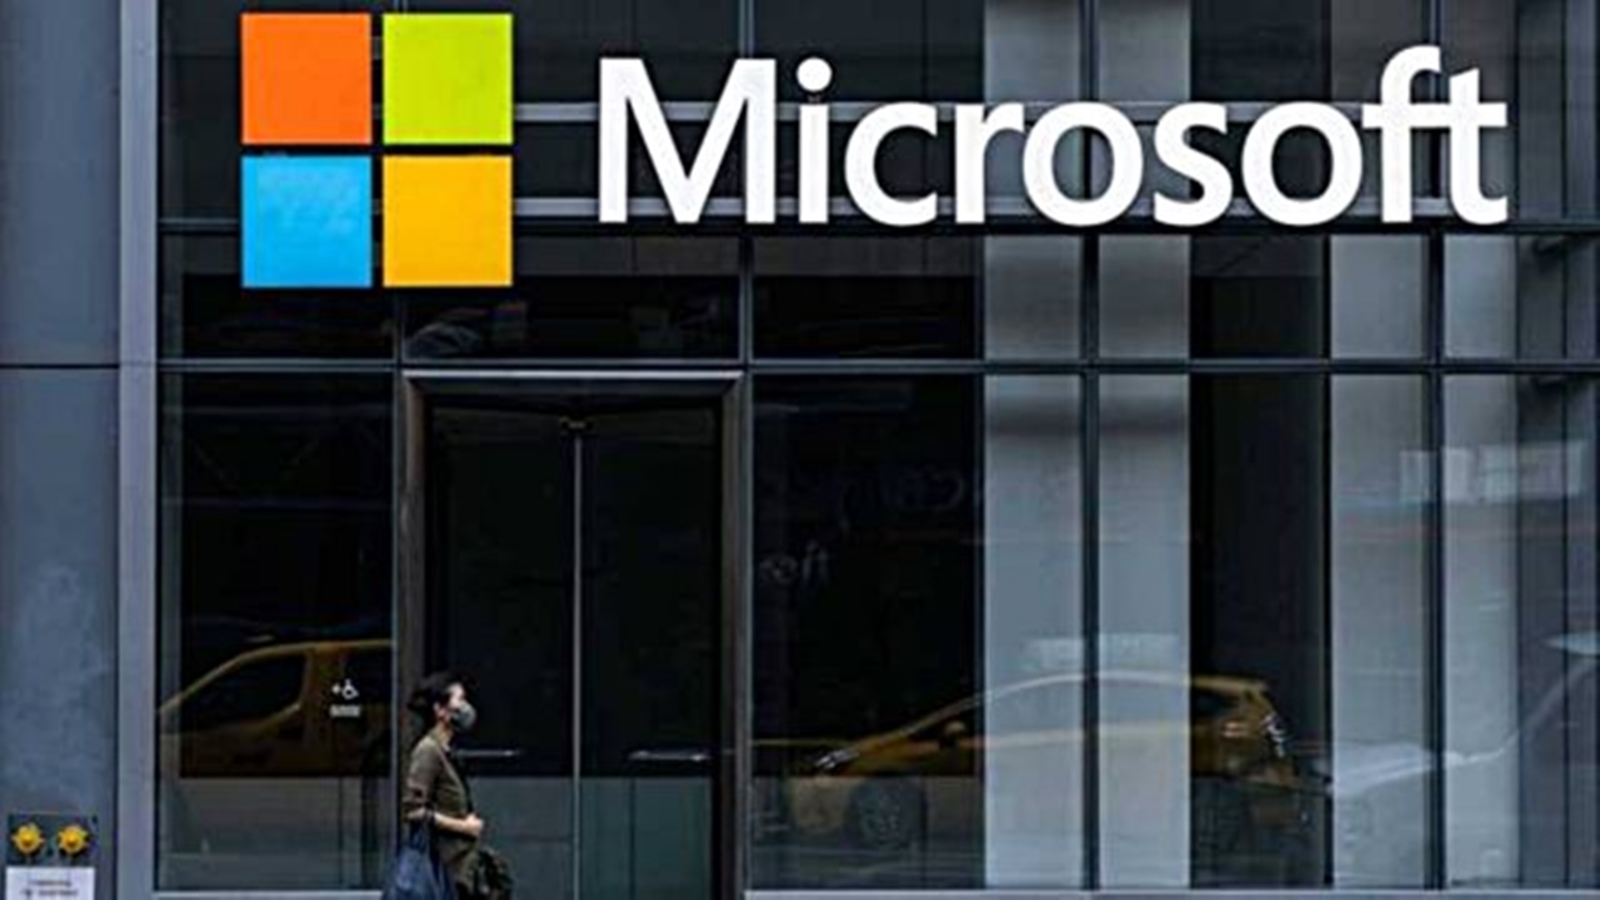 Russian influence operations targeting US election have slowly begun: Microsoft